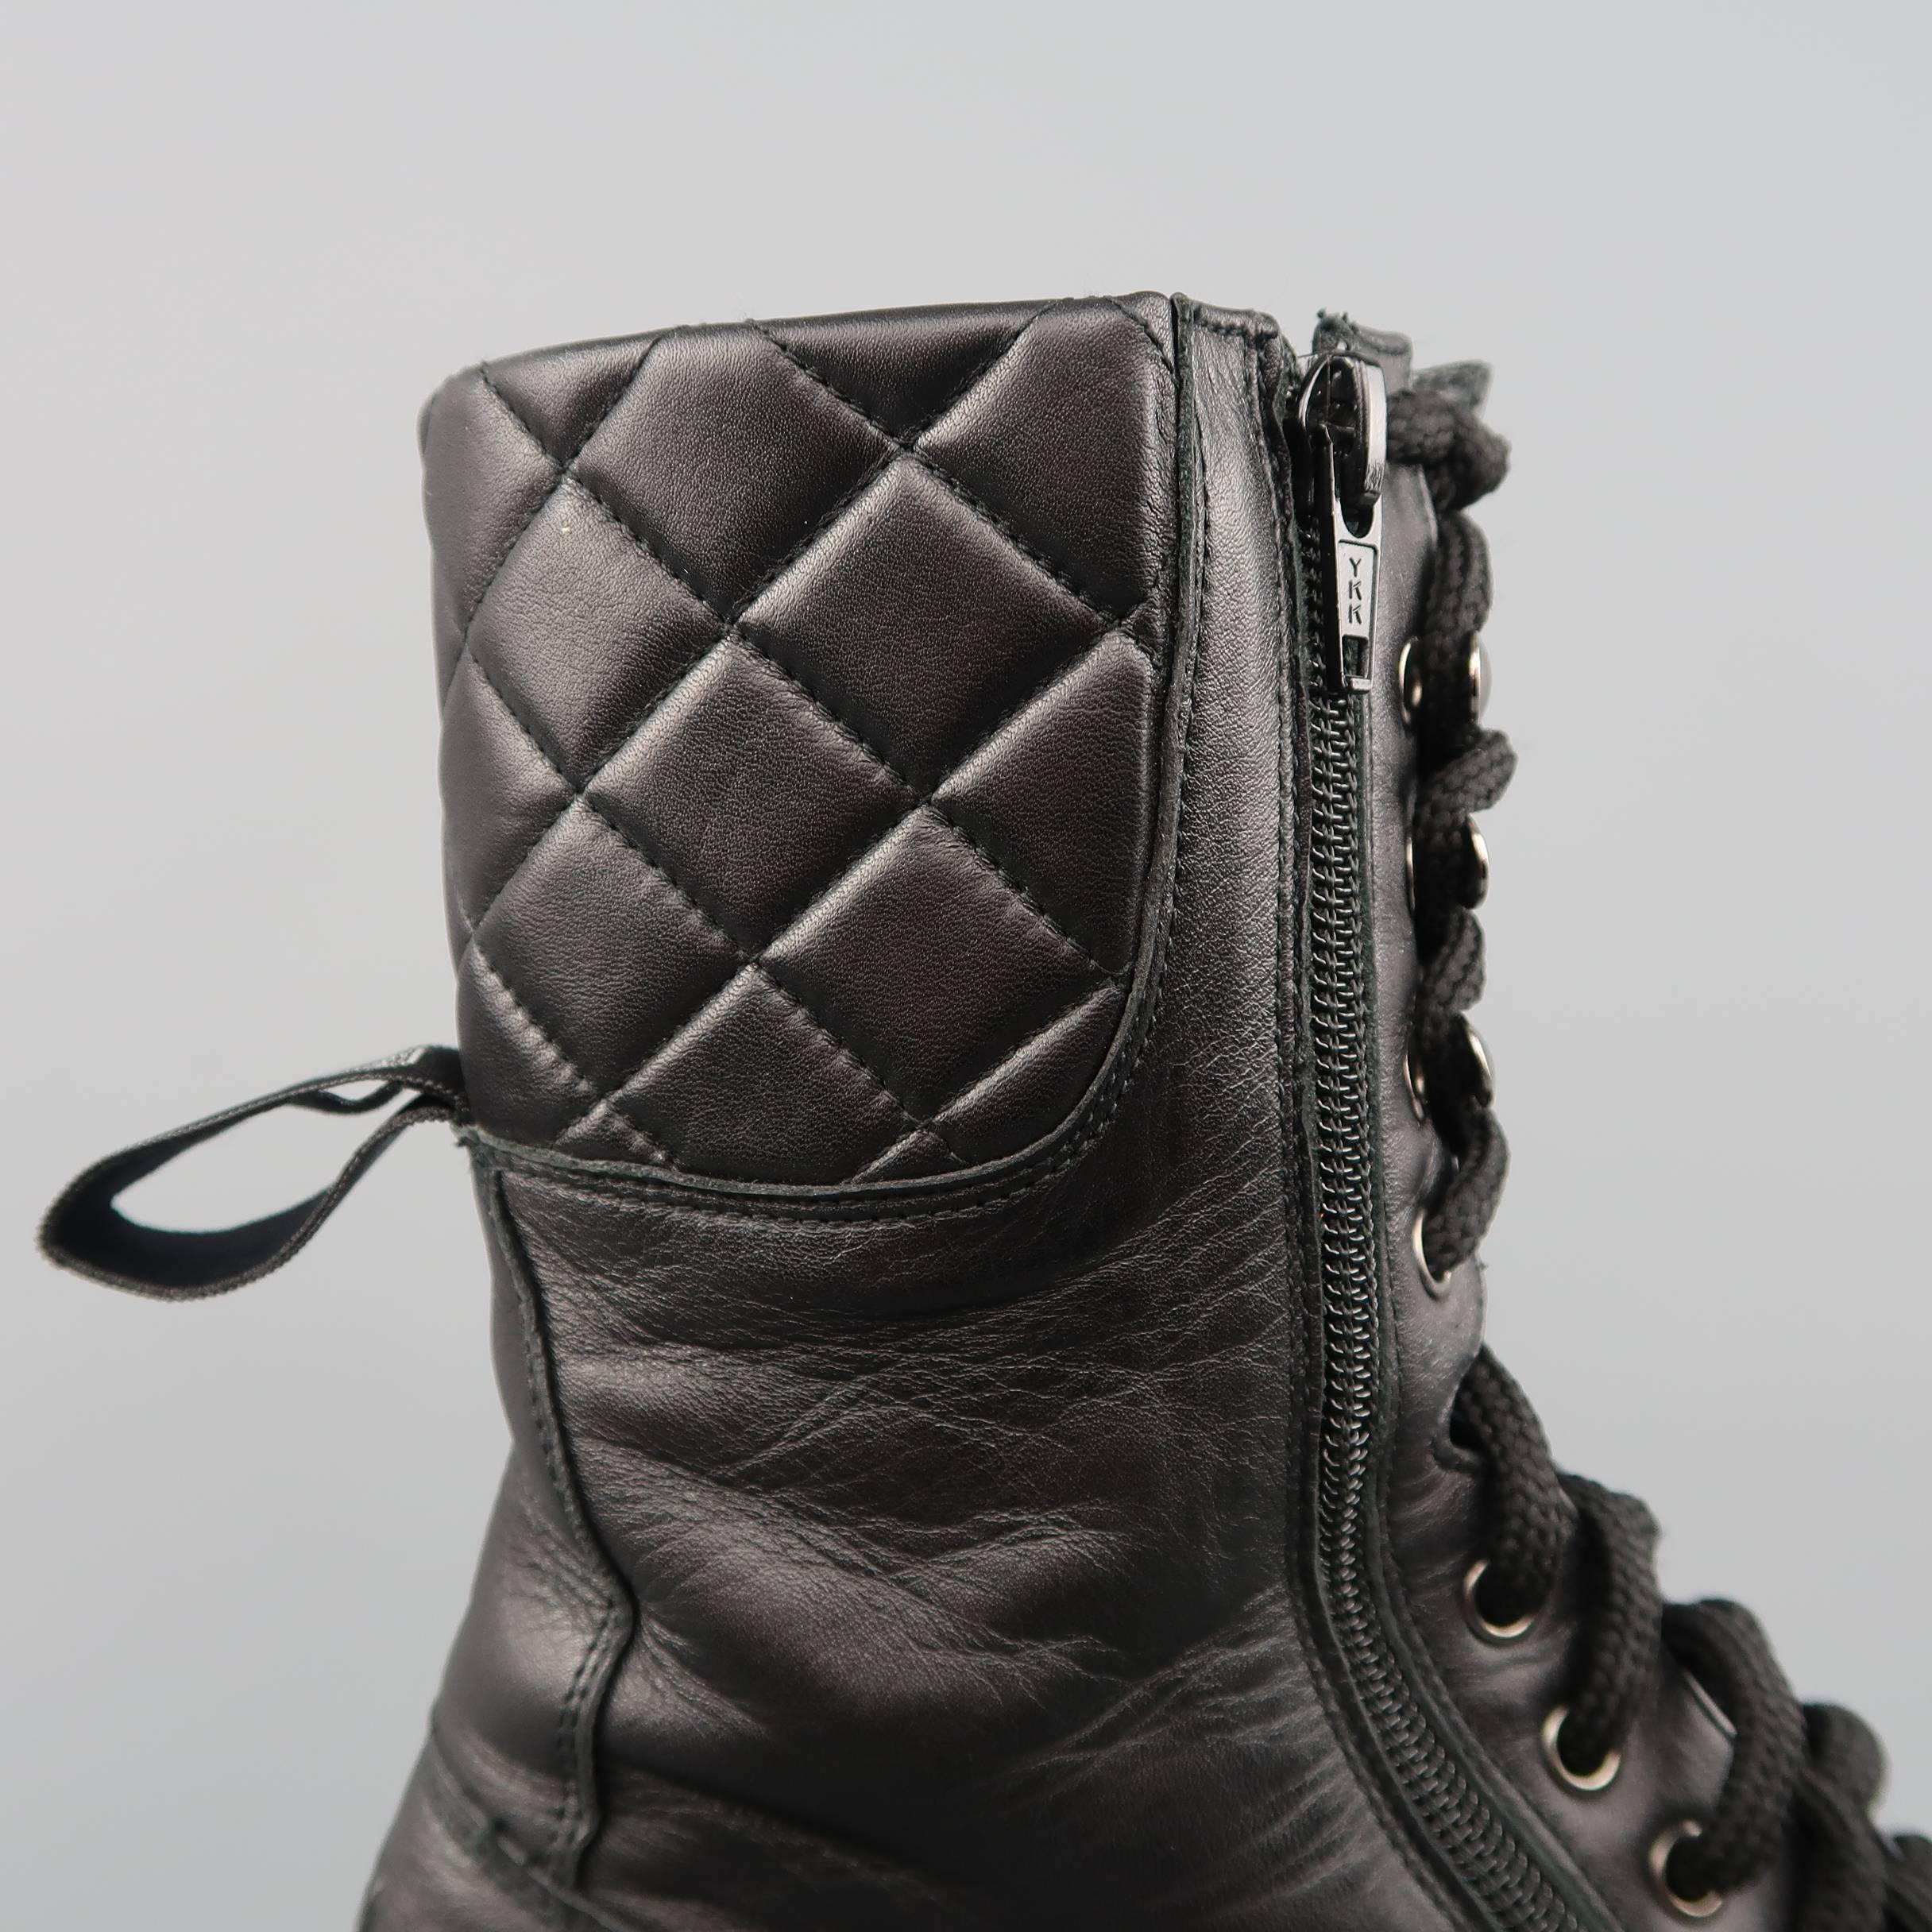 CHANEL Size 10 Quilted Black Leather Zip Lace Up Military Combat Boots 1